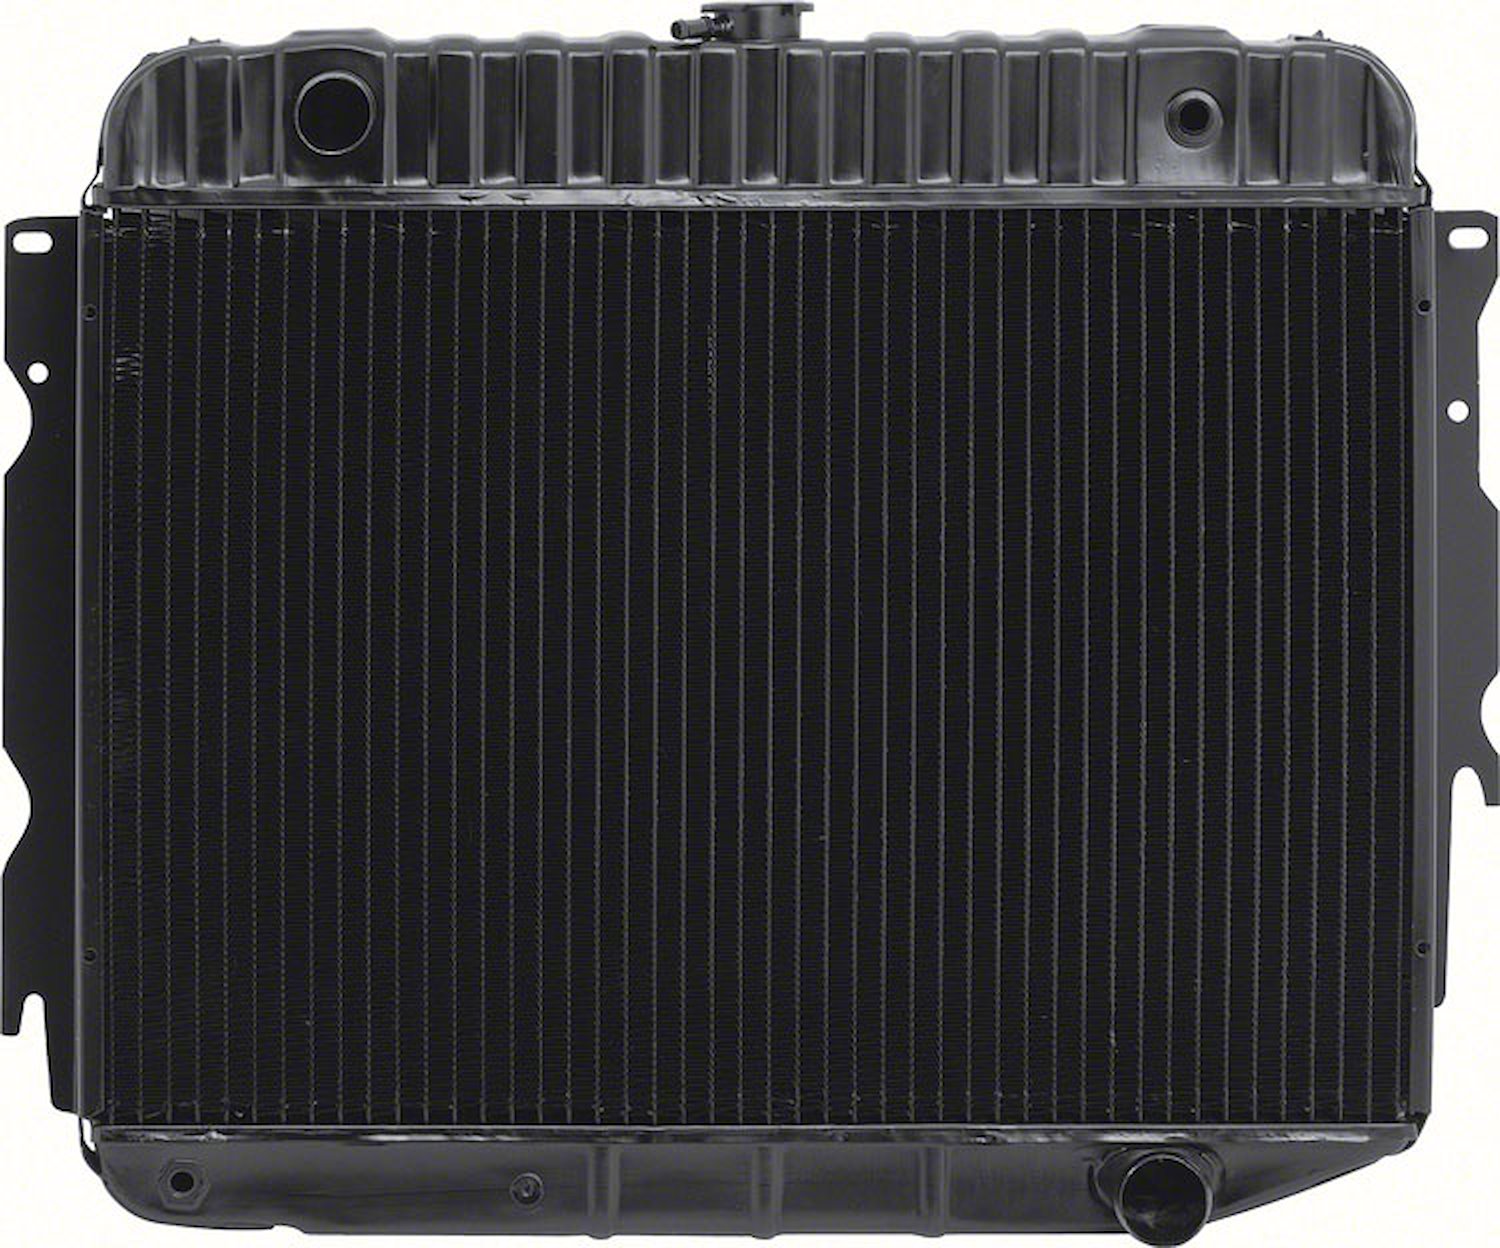 MD2300S Replacement Radiator 1973 Mopar B/E-Body Small Block V8 With Standard Trans 4 Row 26" Wide